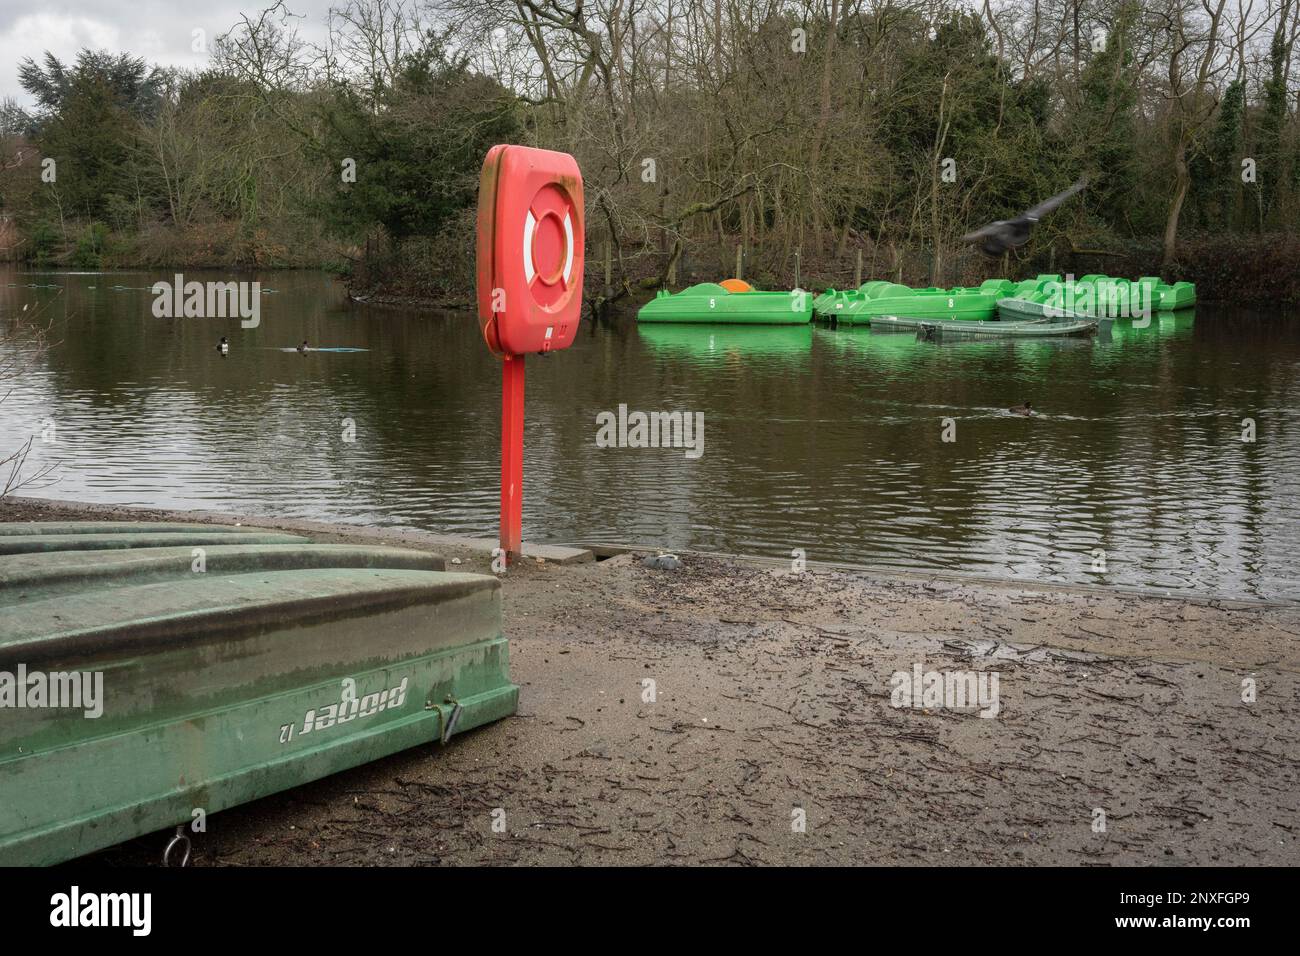 Newer pedalos are seen across the lake from a lifebuoy and an older boat in Dulwich Park, Southwark, on 22nd February 2023, London, England. Stock Photo